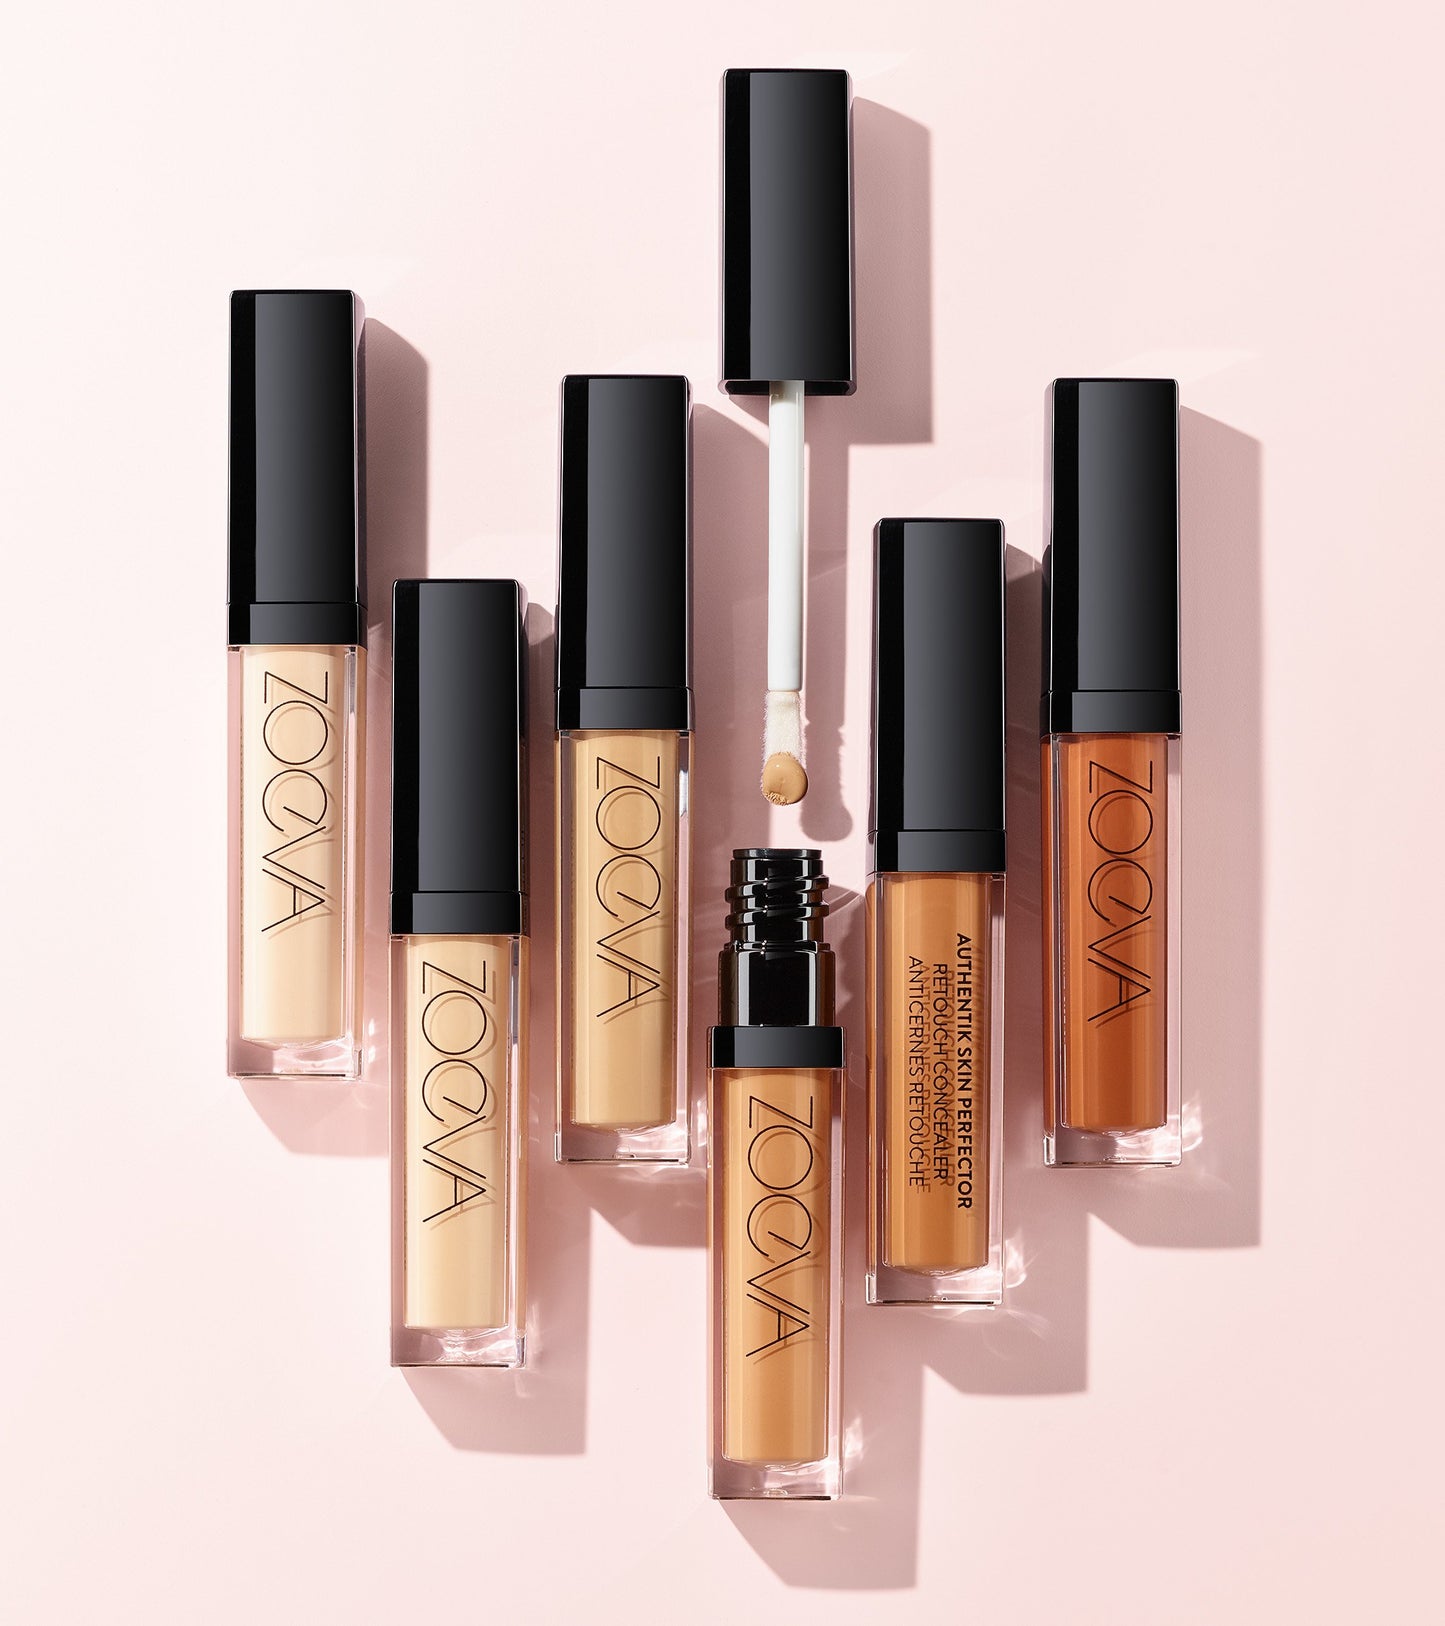 AUTHENTIK SKIN PERFECTOR CONCEALER (120 EVIDENT) Expanded Image 4